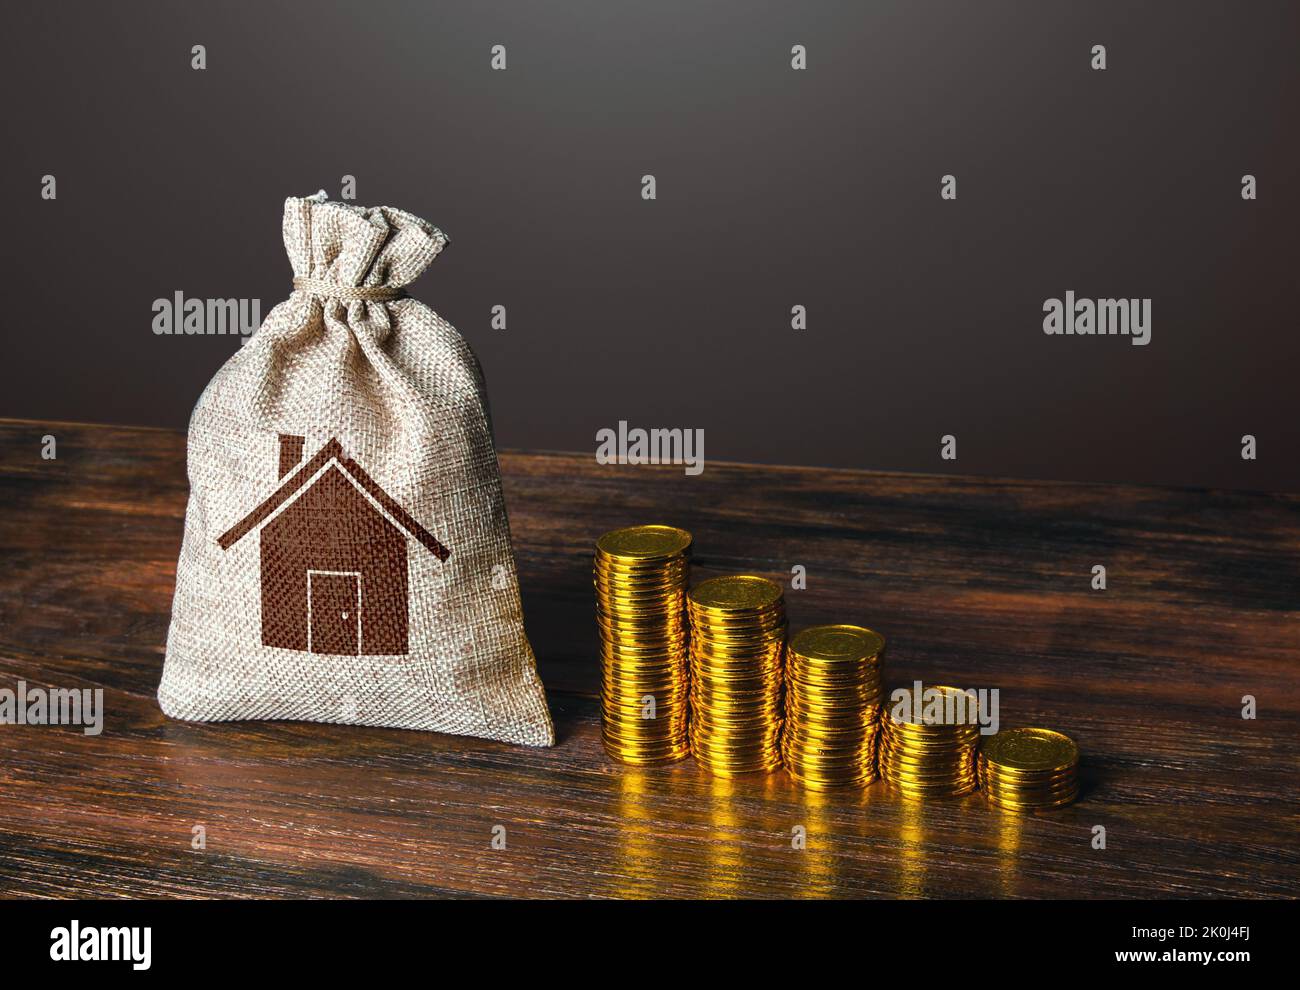 Raise money to buy a new home. Economy on household bills. Energy efficiency and cash saving. Profit from investment in real estate rental. Loan mortg Stock Photo